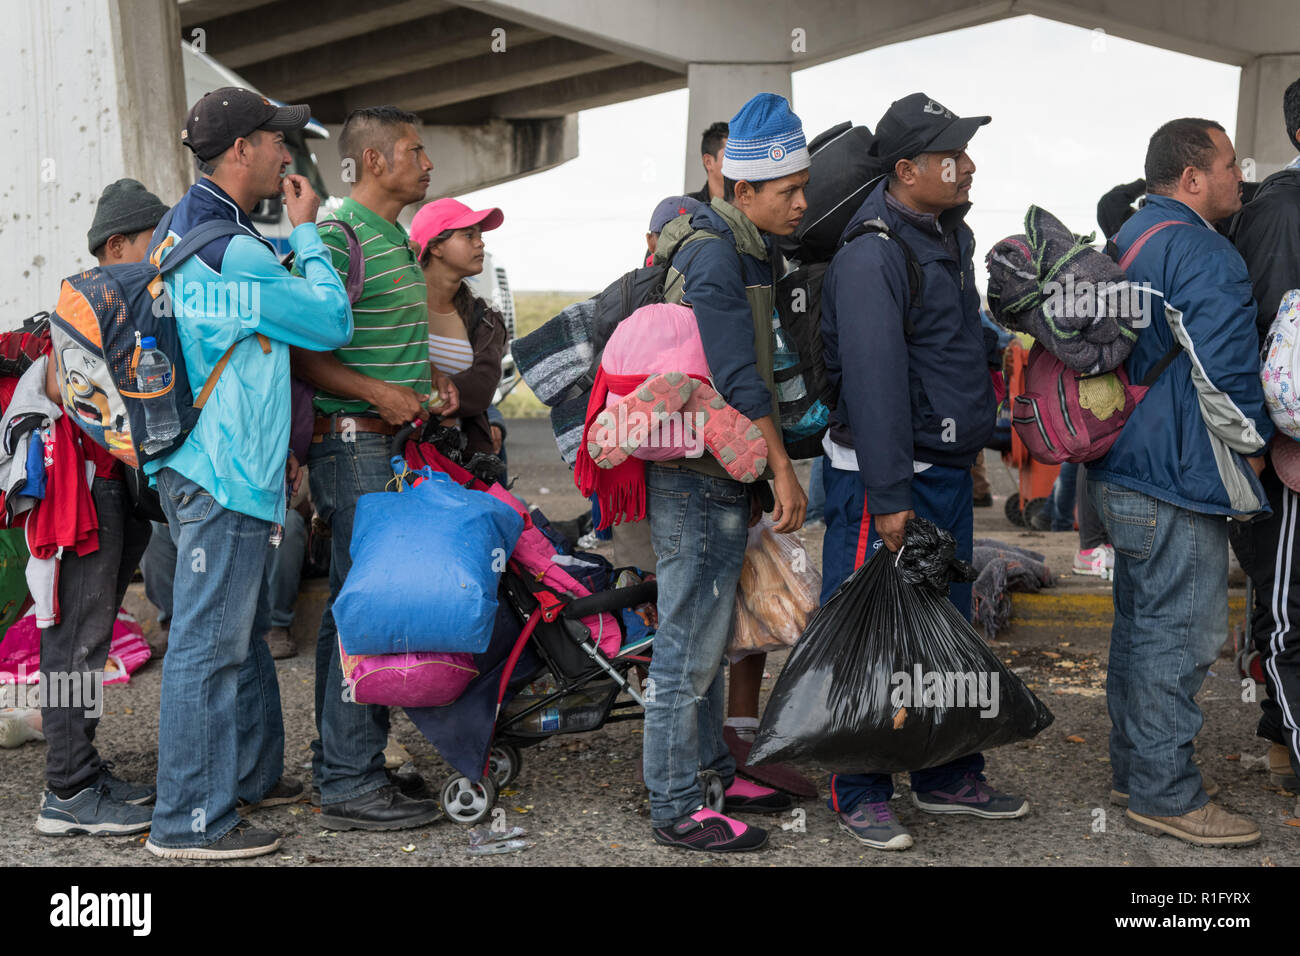 Irapuato, Guanajuato, Mexico. 12th Nov 2018. Honduran refugees with the Central American migrant caravan wait in line for a ride under a highway overpass to continue the journey northwest toward the U.S. border November 12, 2018 in Irapuato, Guanajuato, Mexico. The caravan has been on the road for a month is half way along their journey to Tijuana. Credit: Planetpix/Alamy Live News Stock Photo